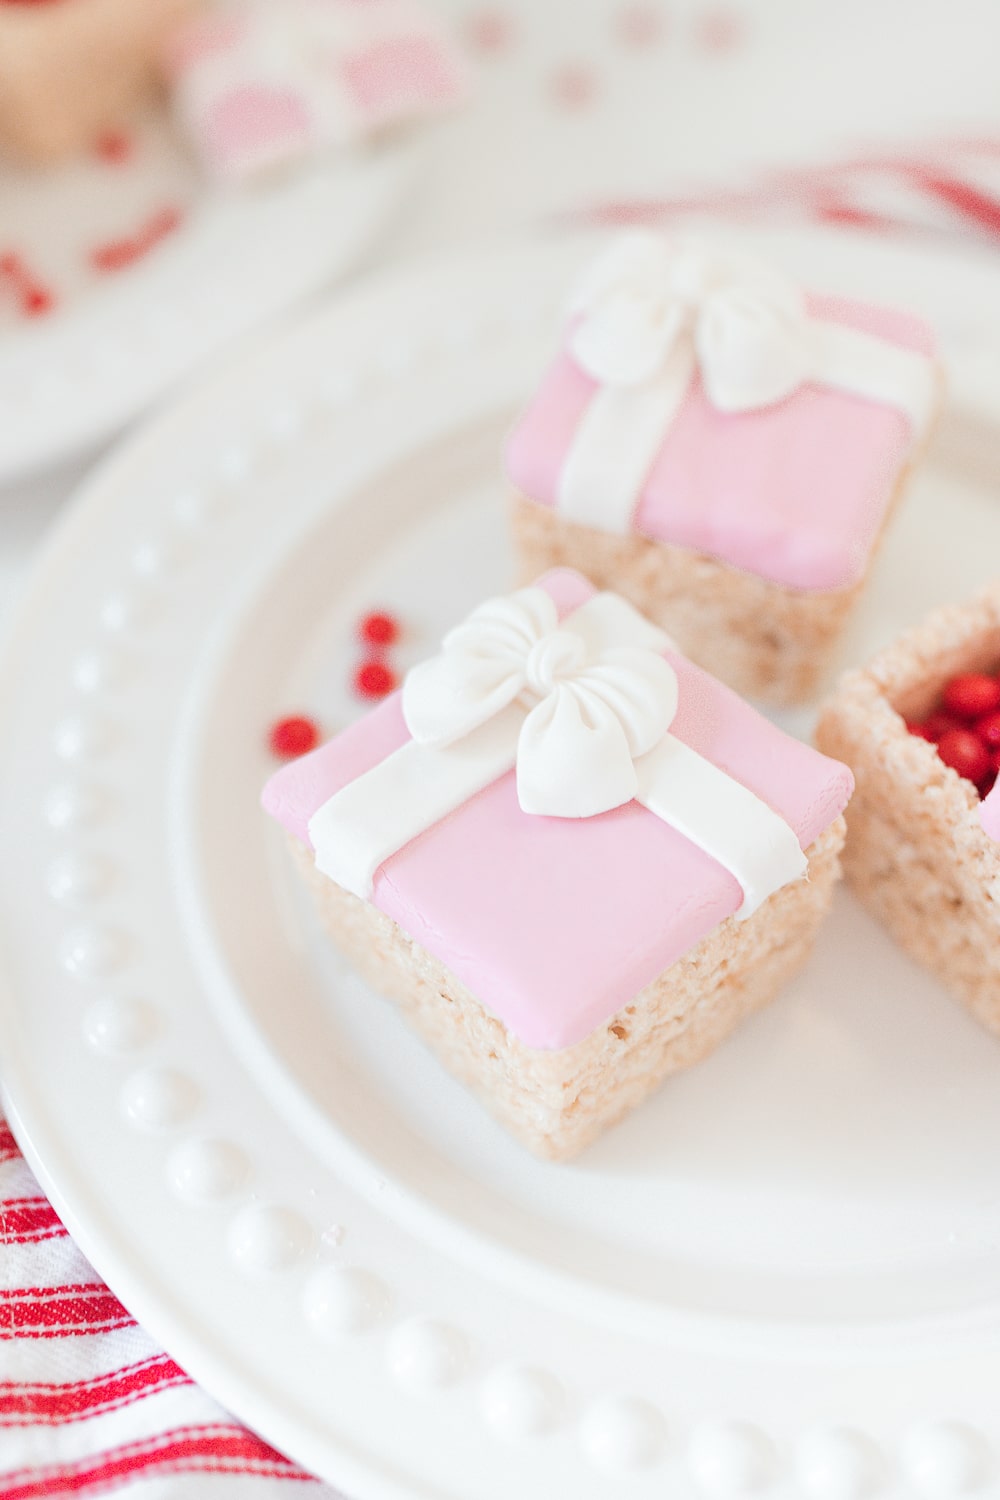 Holiday rice krispie treats created by southern lifestyle blogger Stephanie Ziajka on Diary of a Debutante